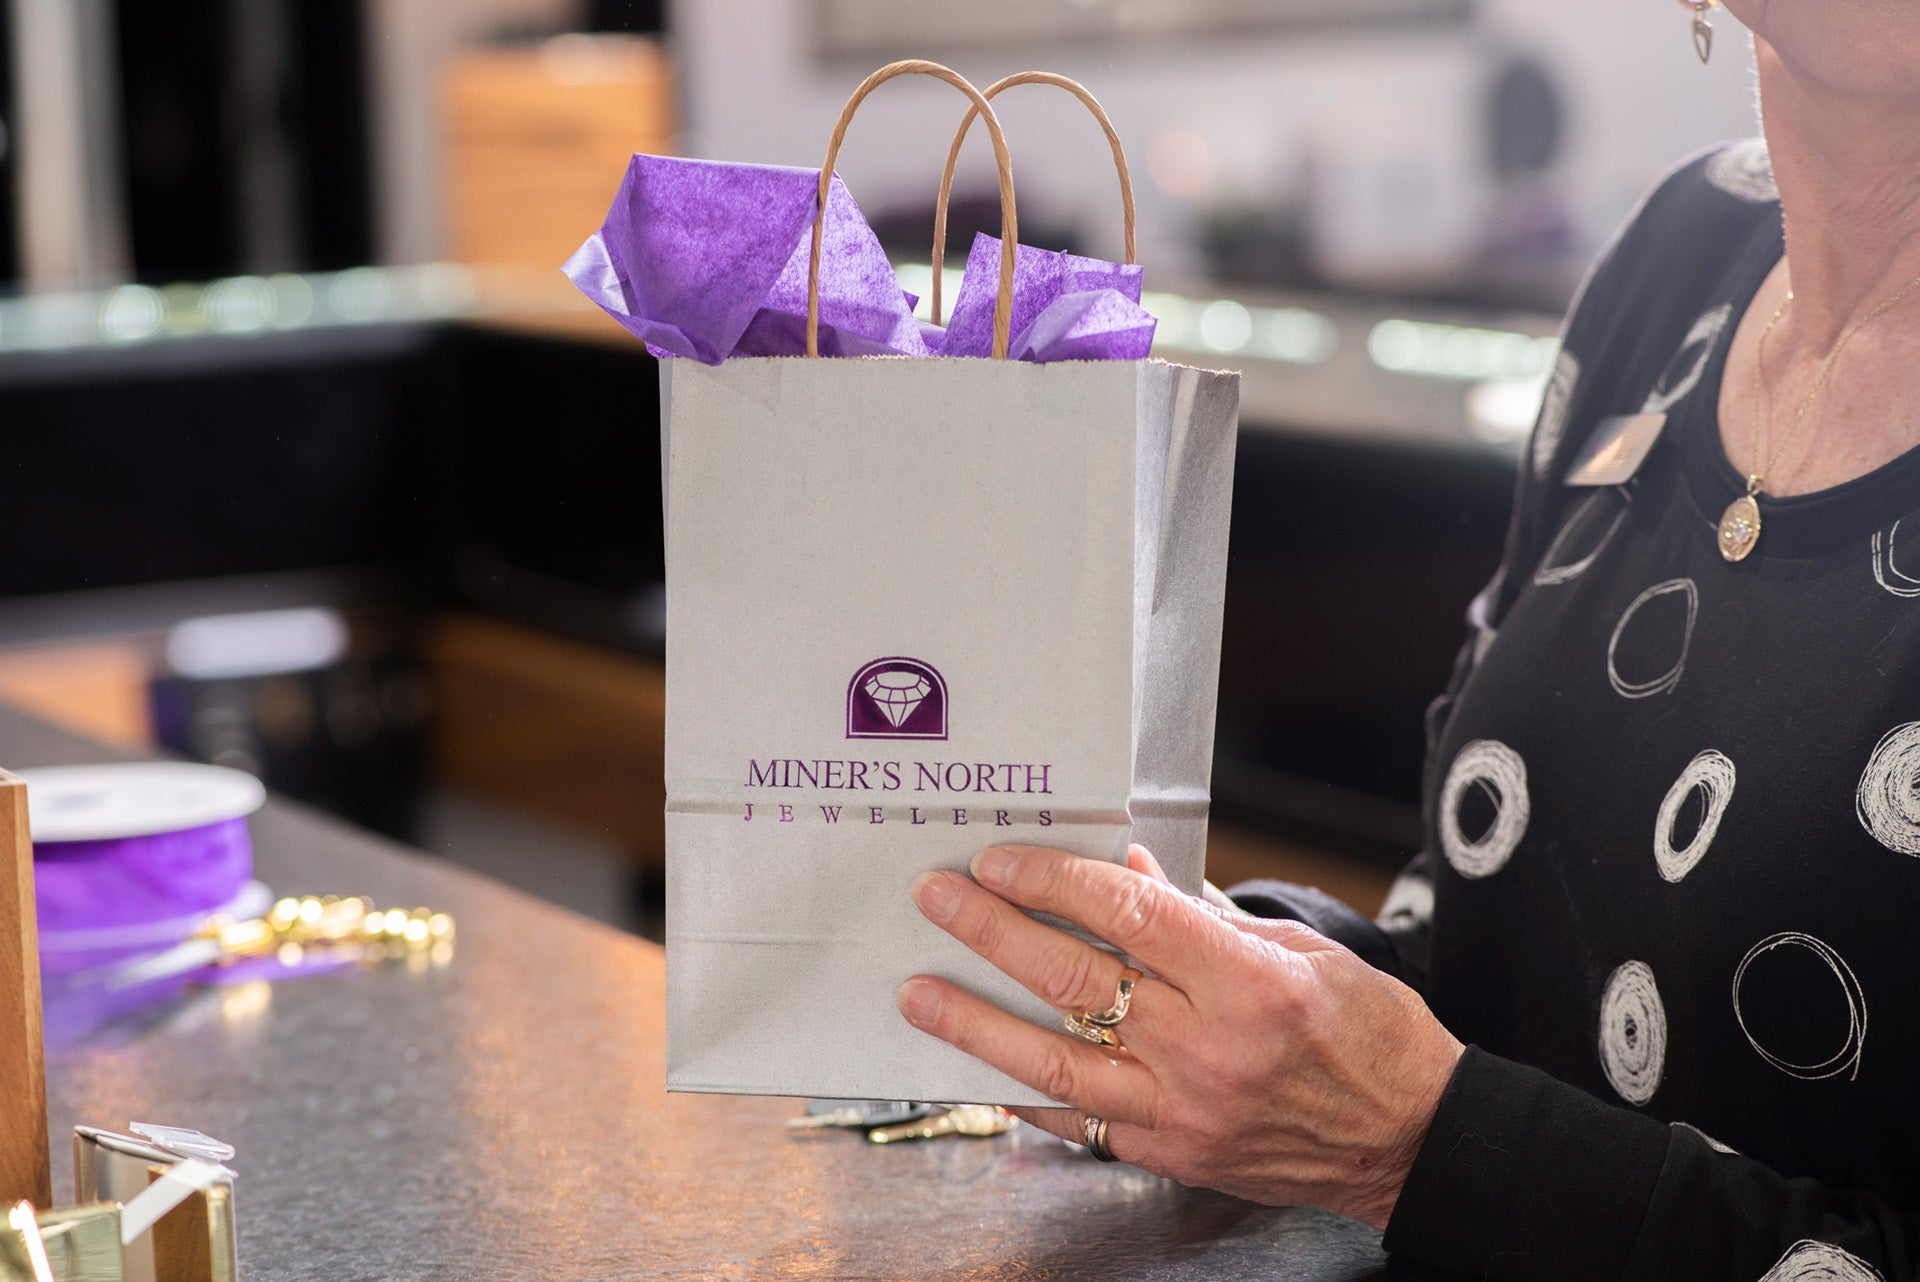 Model Holding a Miner's North Jewelers Gift Bag